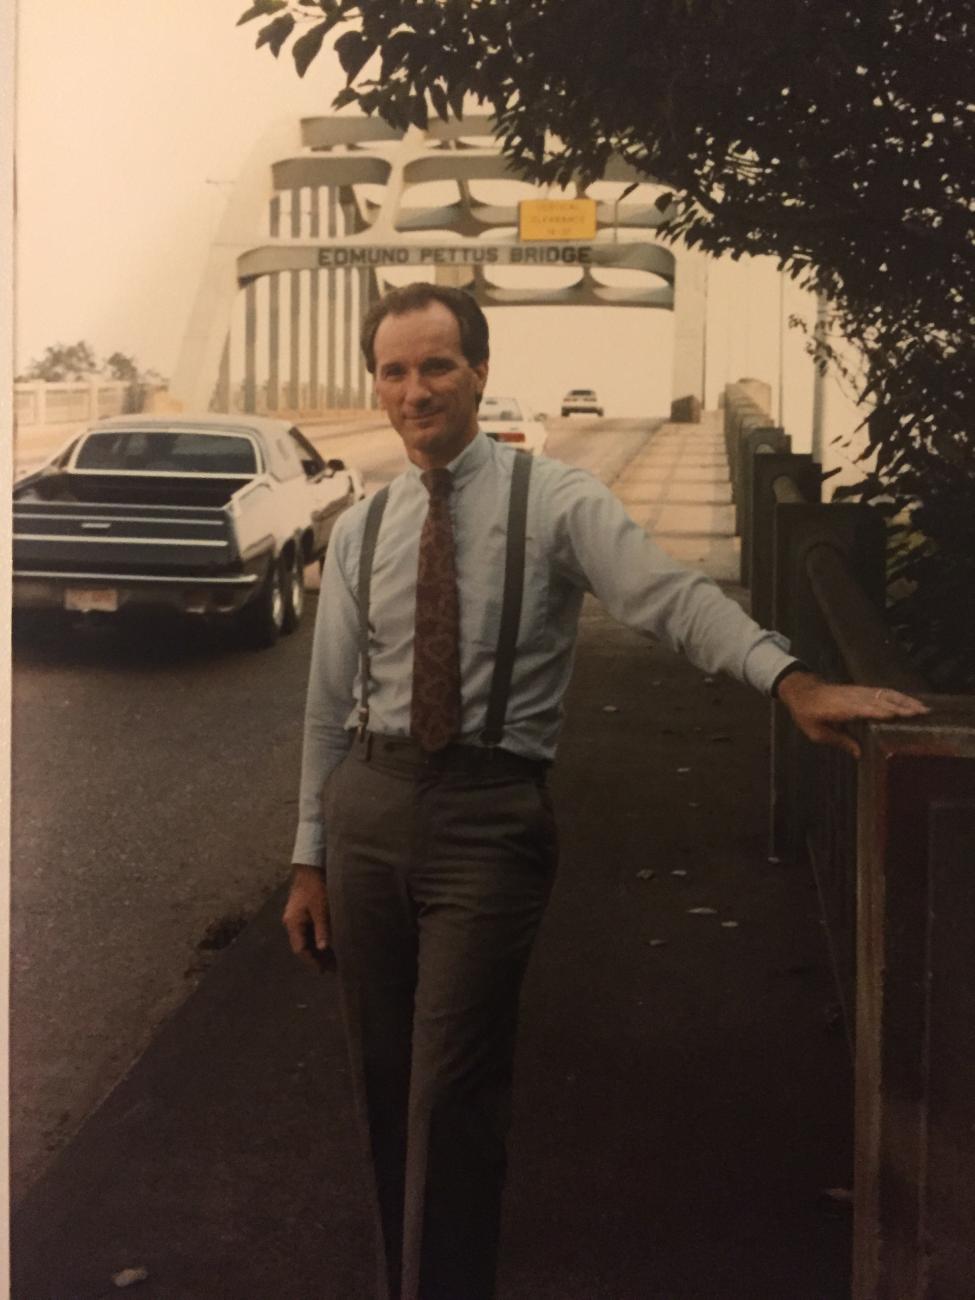 Gerry Hebert posing in front of a bridge with a car in the background